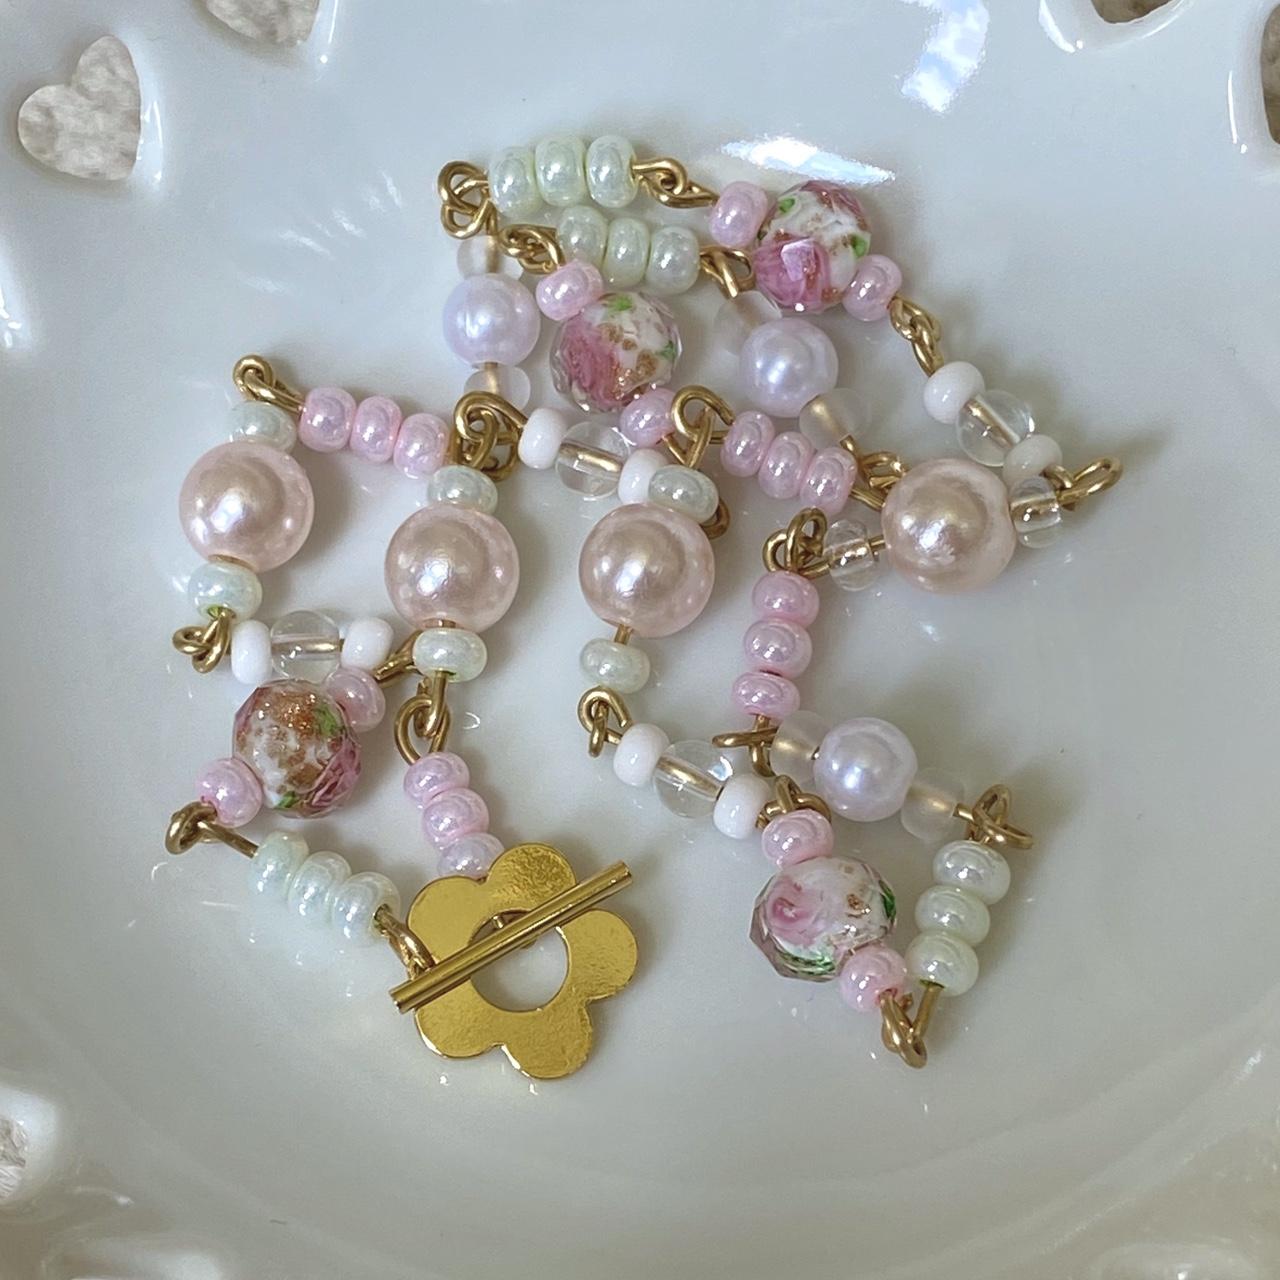 pastel pink 𝓭𝓪𝓲𝓼𝔂 𝓬𝓵𝓪𝓼𝓹 necklace MADE TO... - Depop